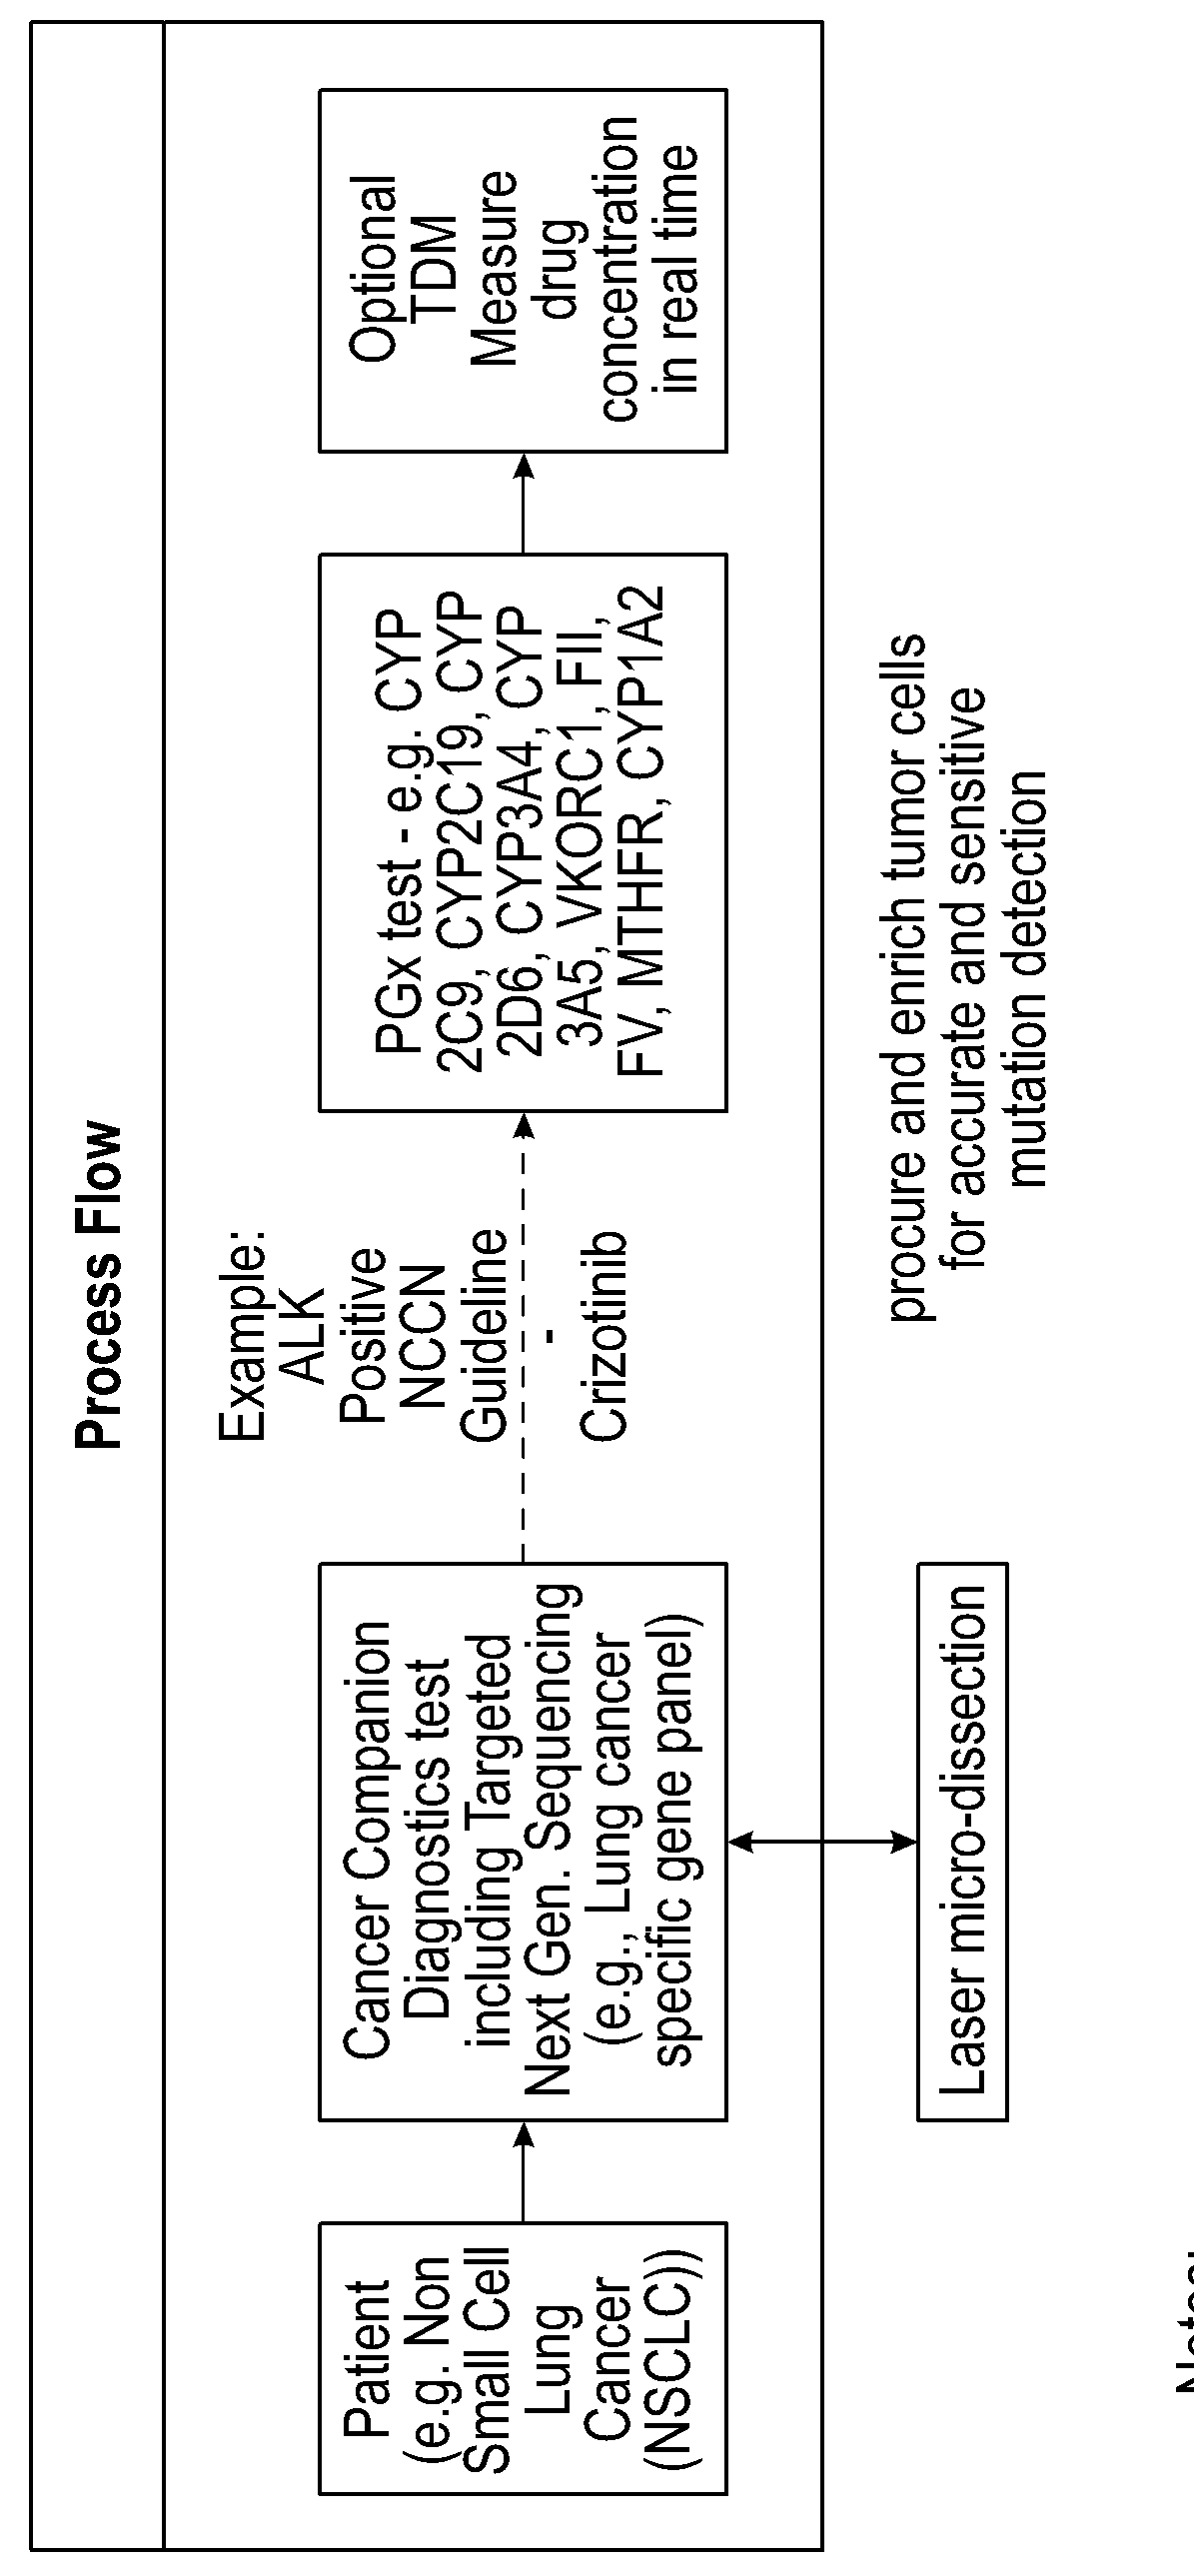 Tailored drug therapies and methods and systems for developing same